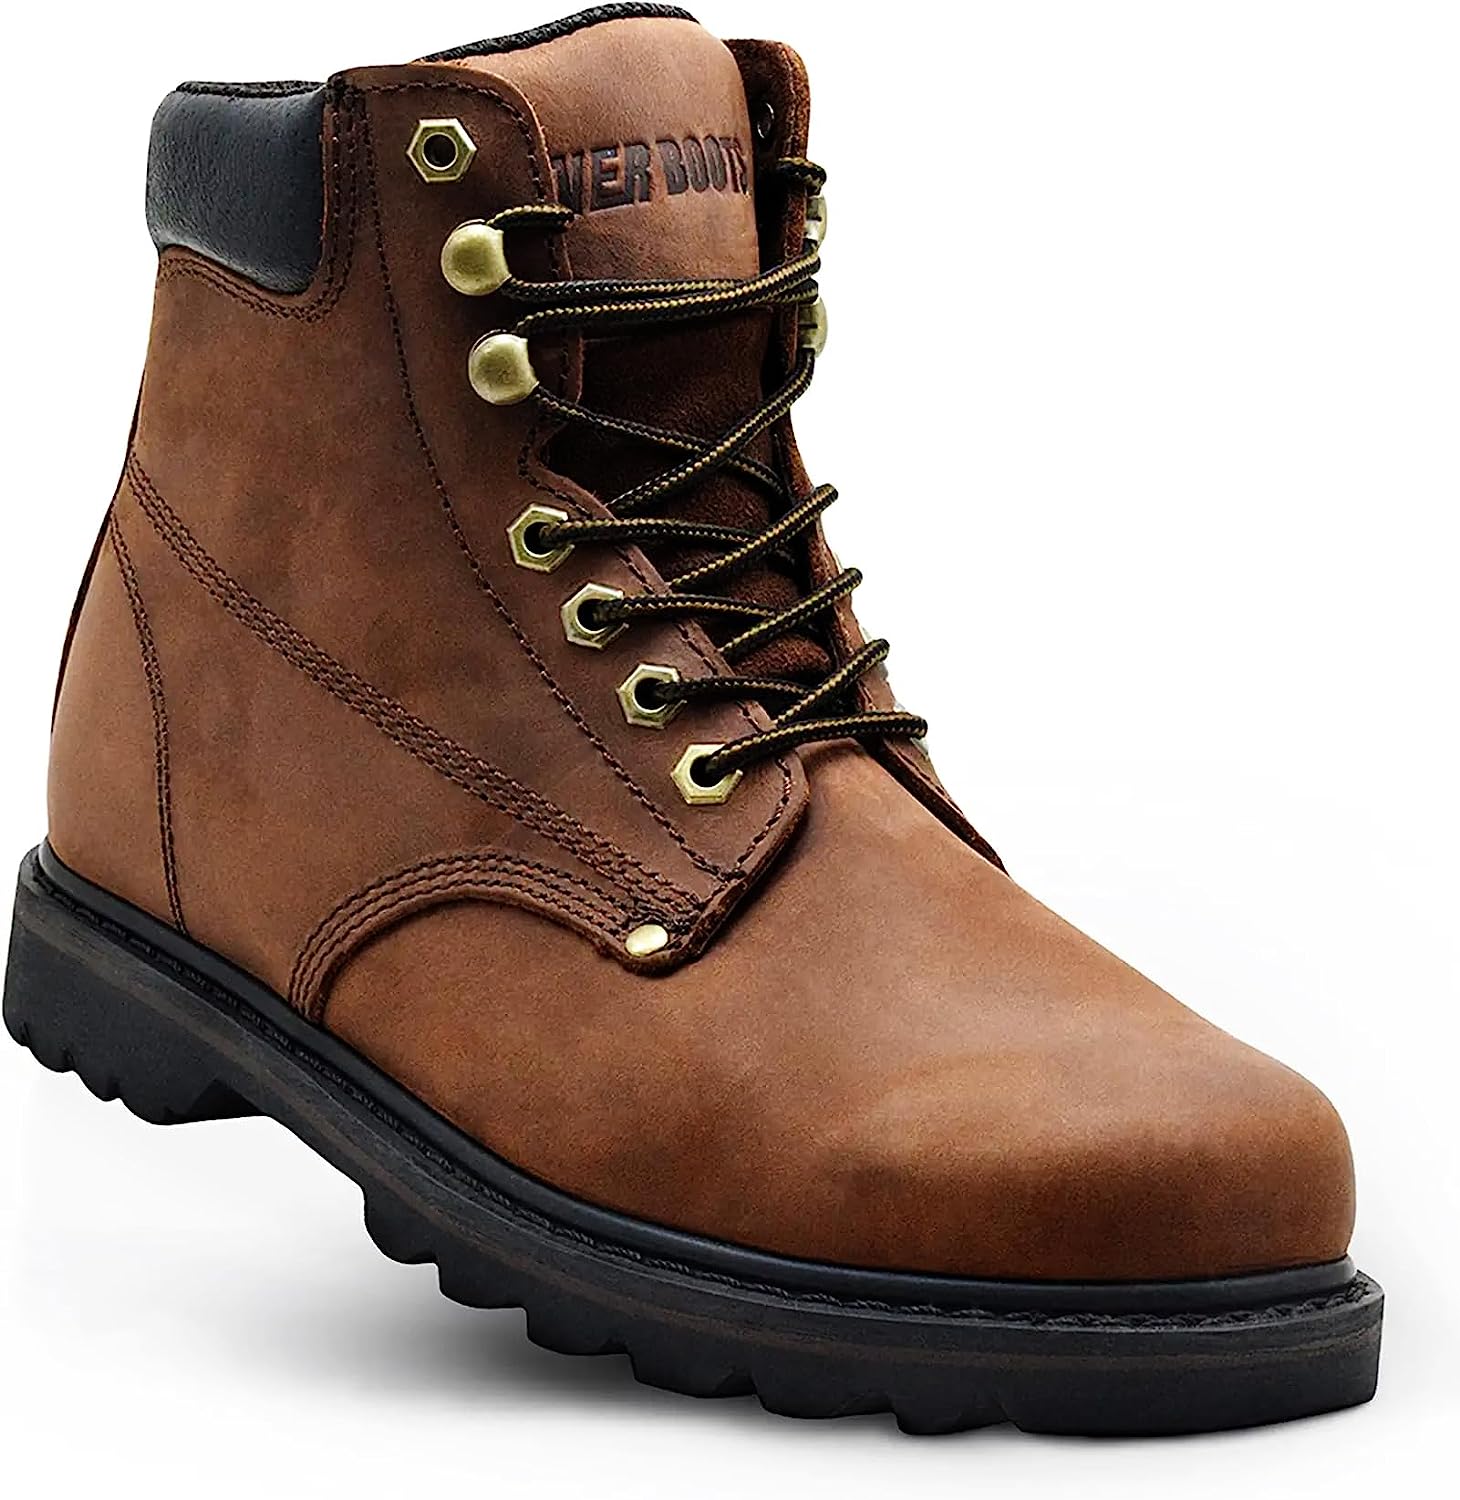 Work Boots for Men Soft Toe – 6inch Leather Boots for [...]